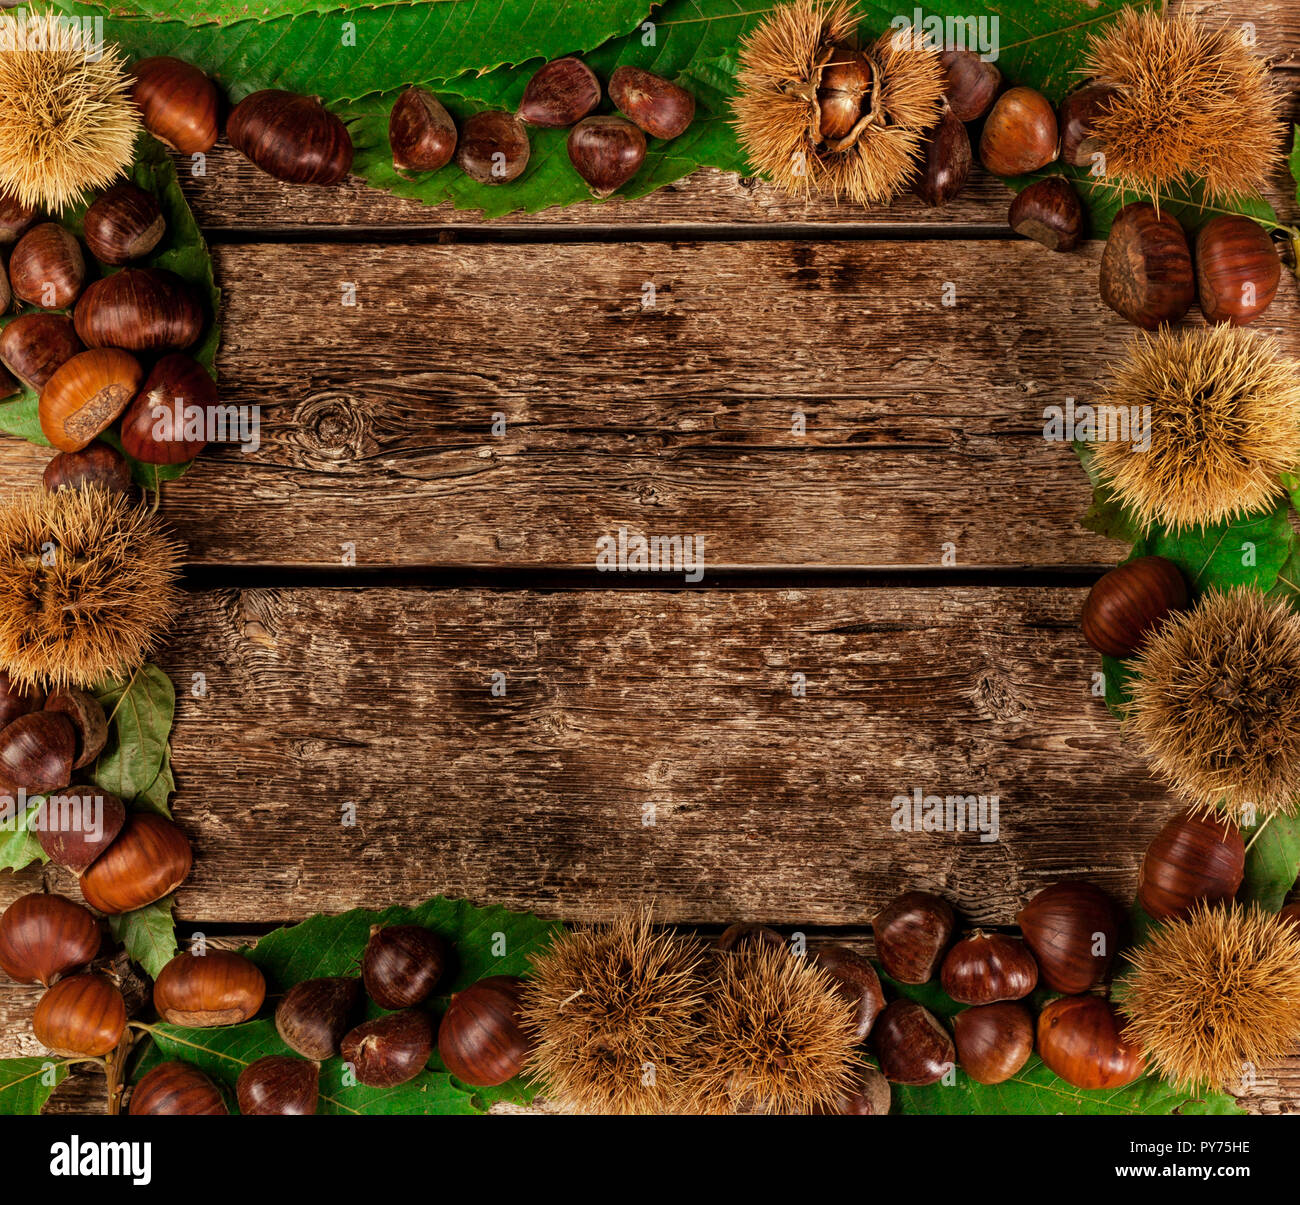 Frame of chestnuts, leaves and chestnut bur on wooden table. Stock Photo